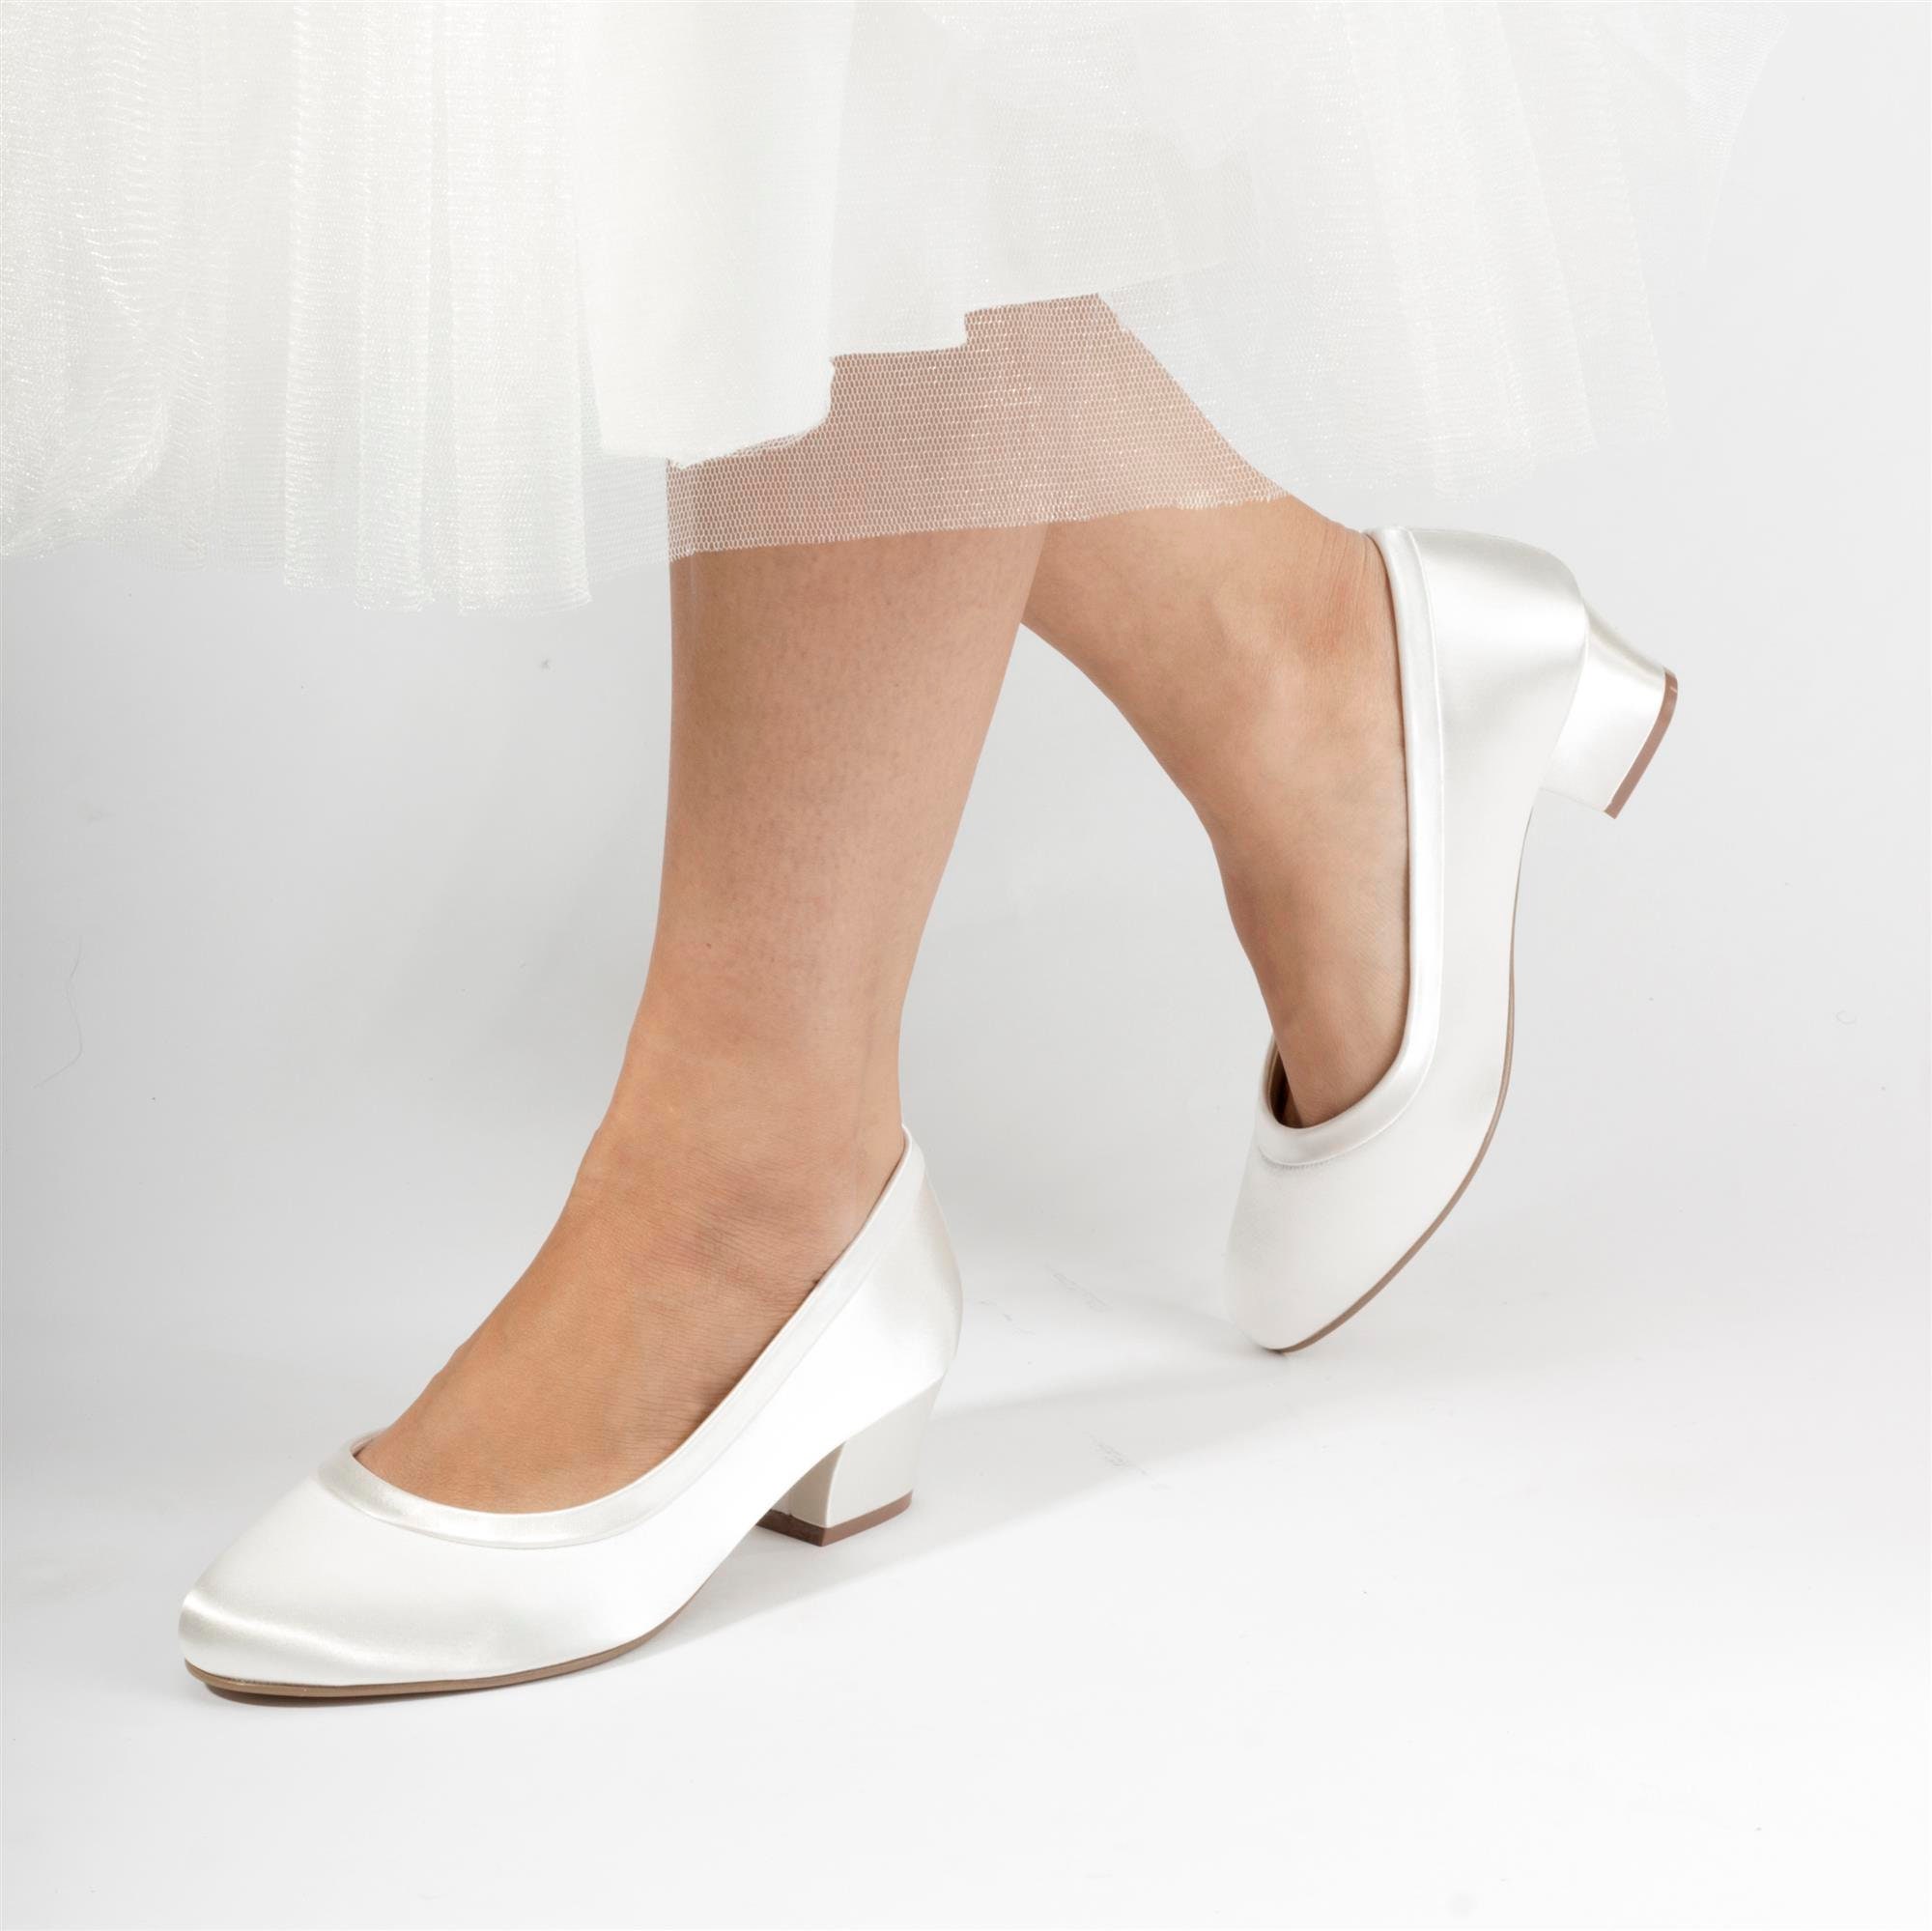 Wide Fit Satin Wedding Bridal Low Block Heel Dyeable Shoes - Etsy